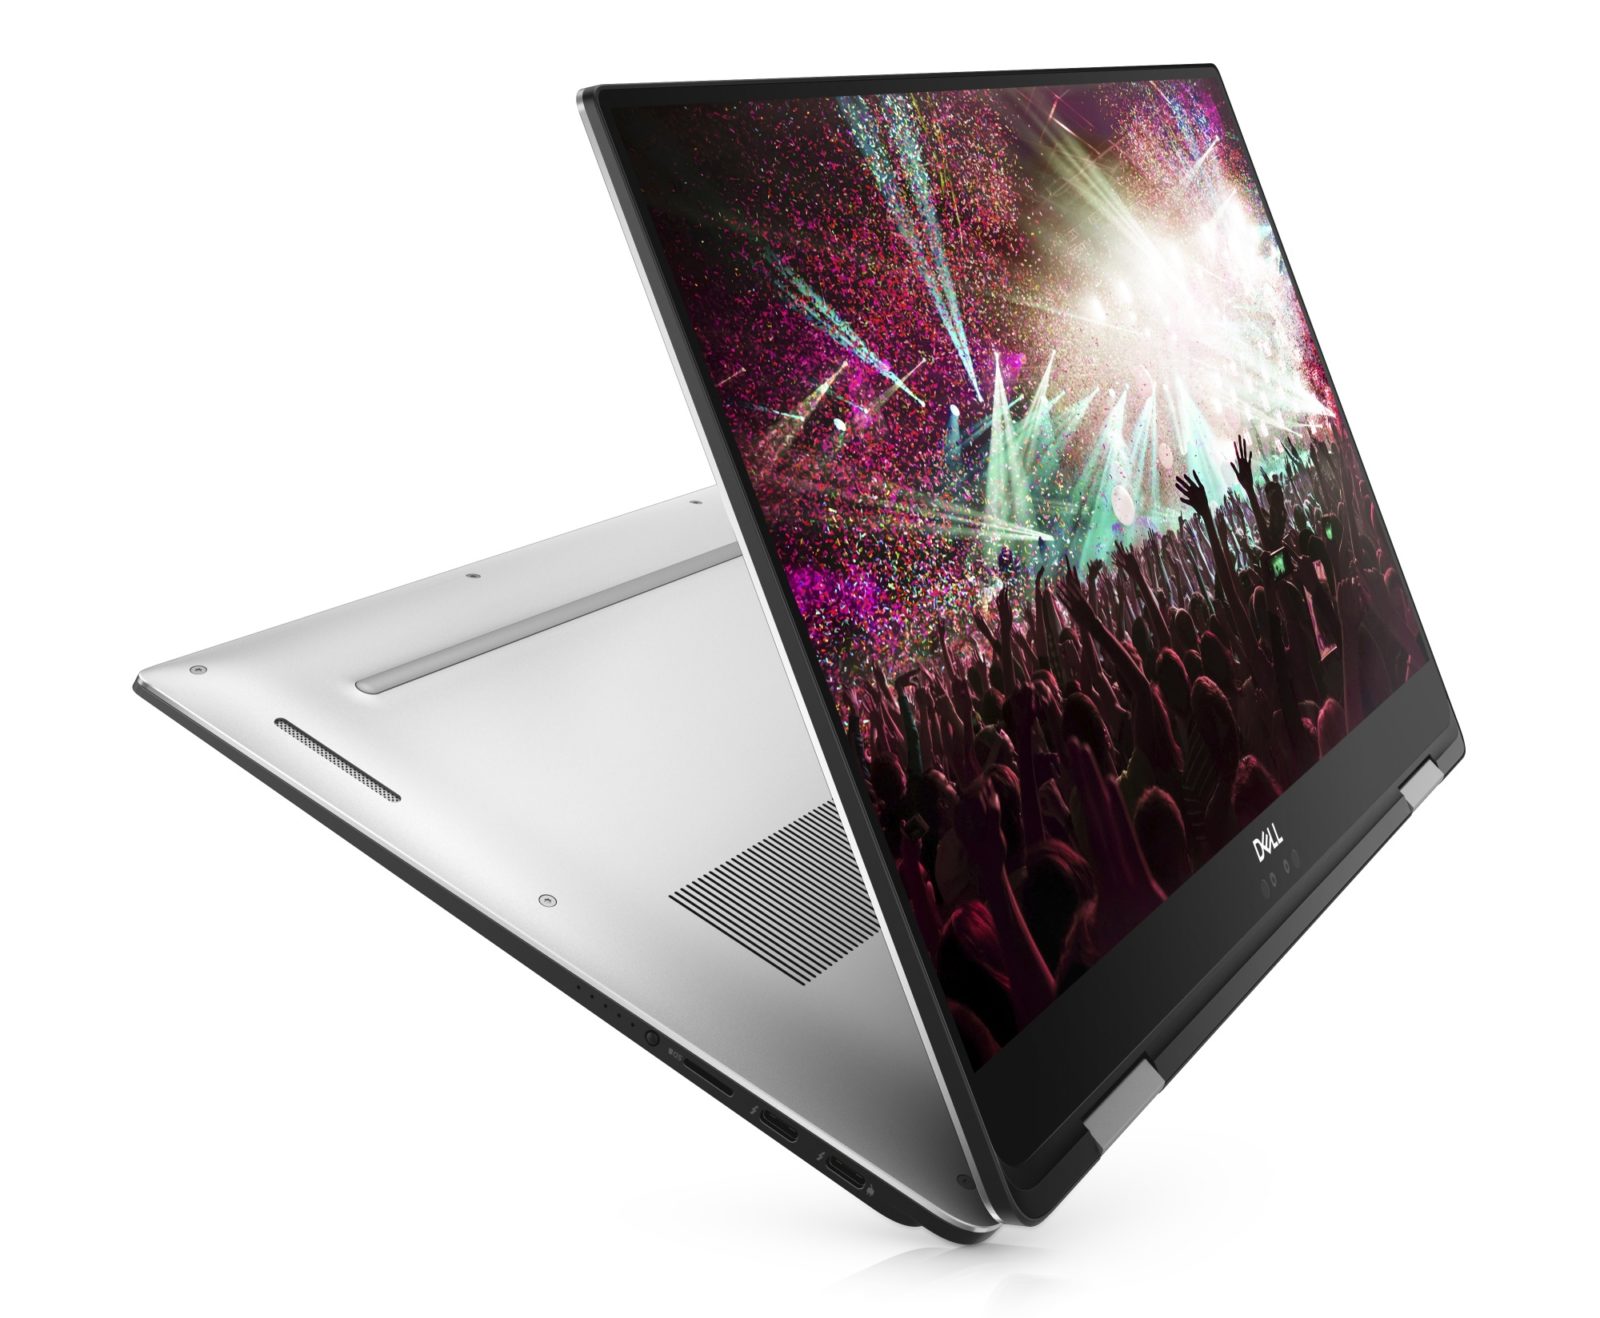 Dell's XPS 15 Ultrabook